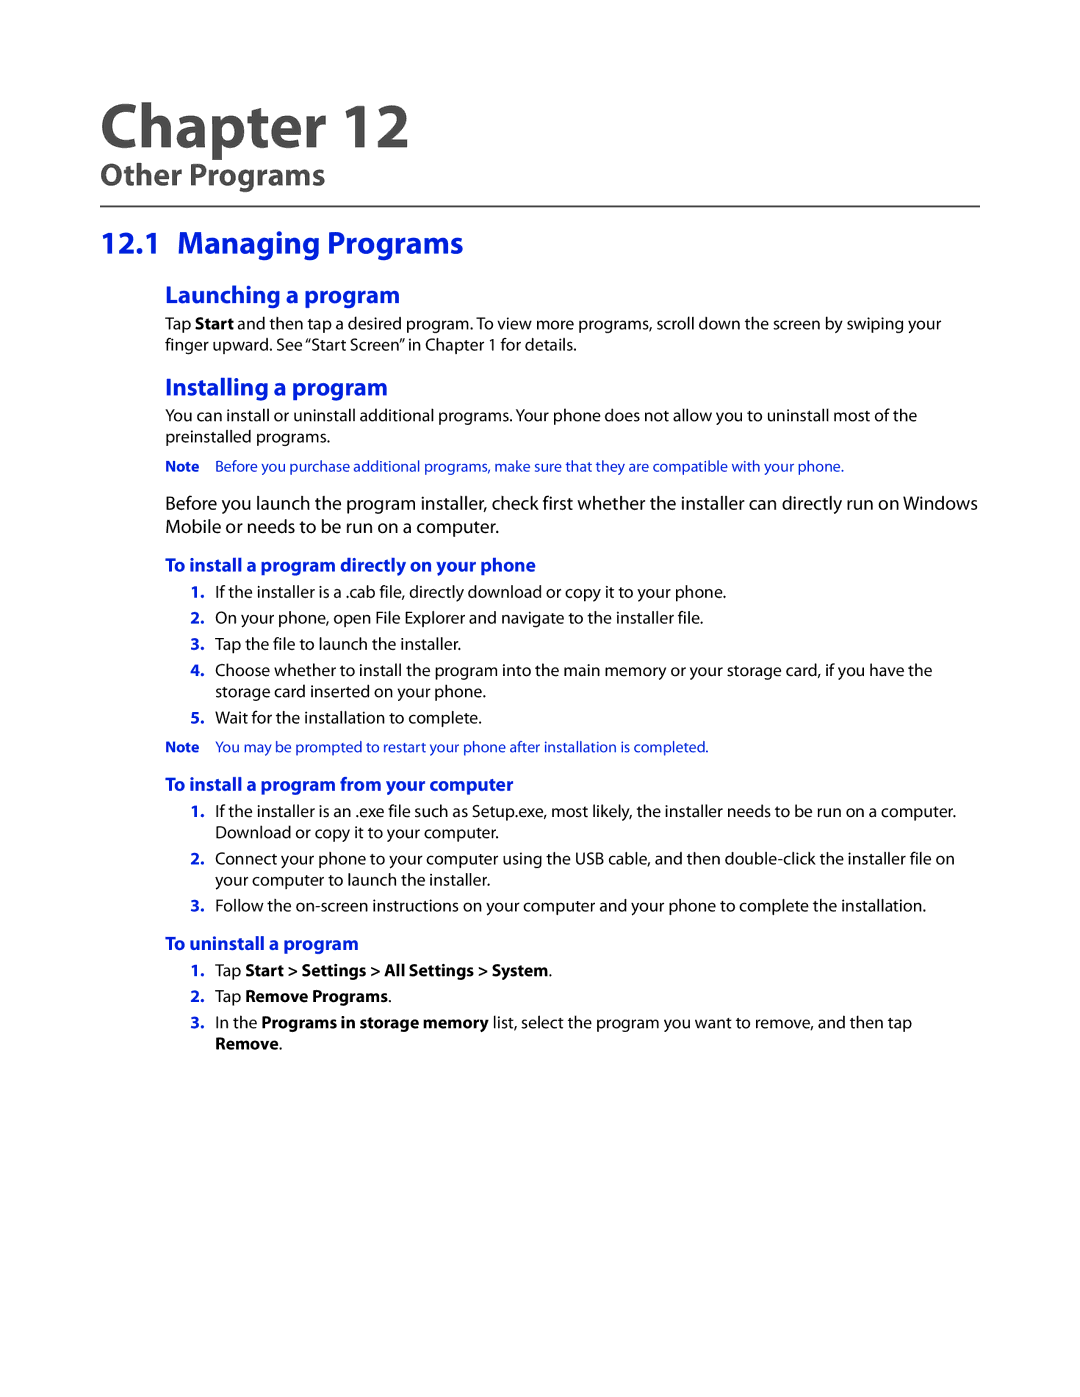 HTC TOUCHPRO2SPT user manual Other Programs, Managing Programs, Launching a program, Installing a program 